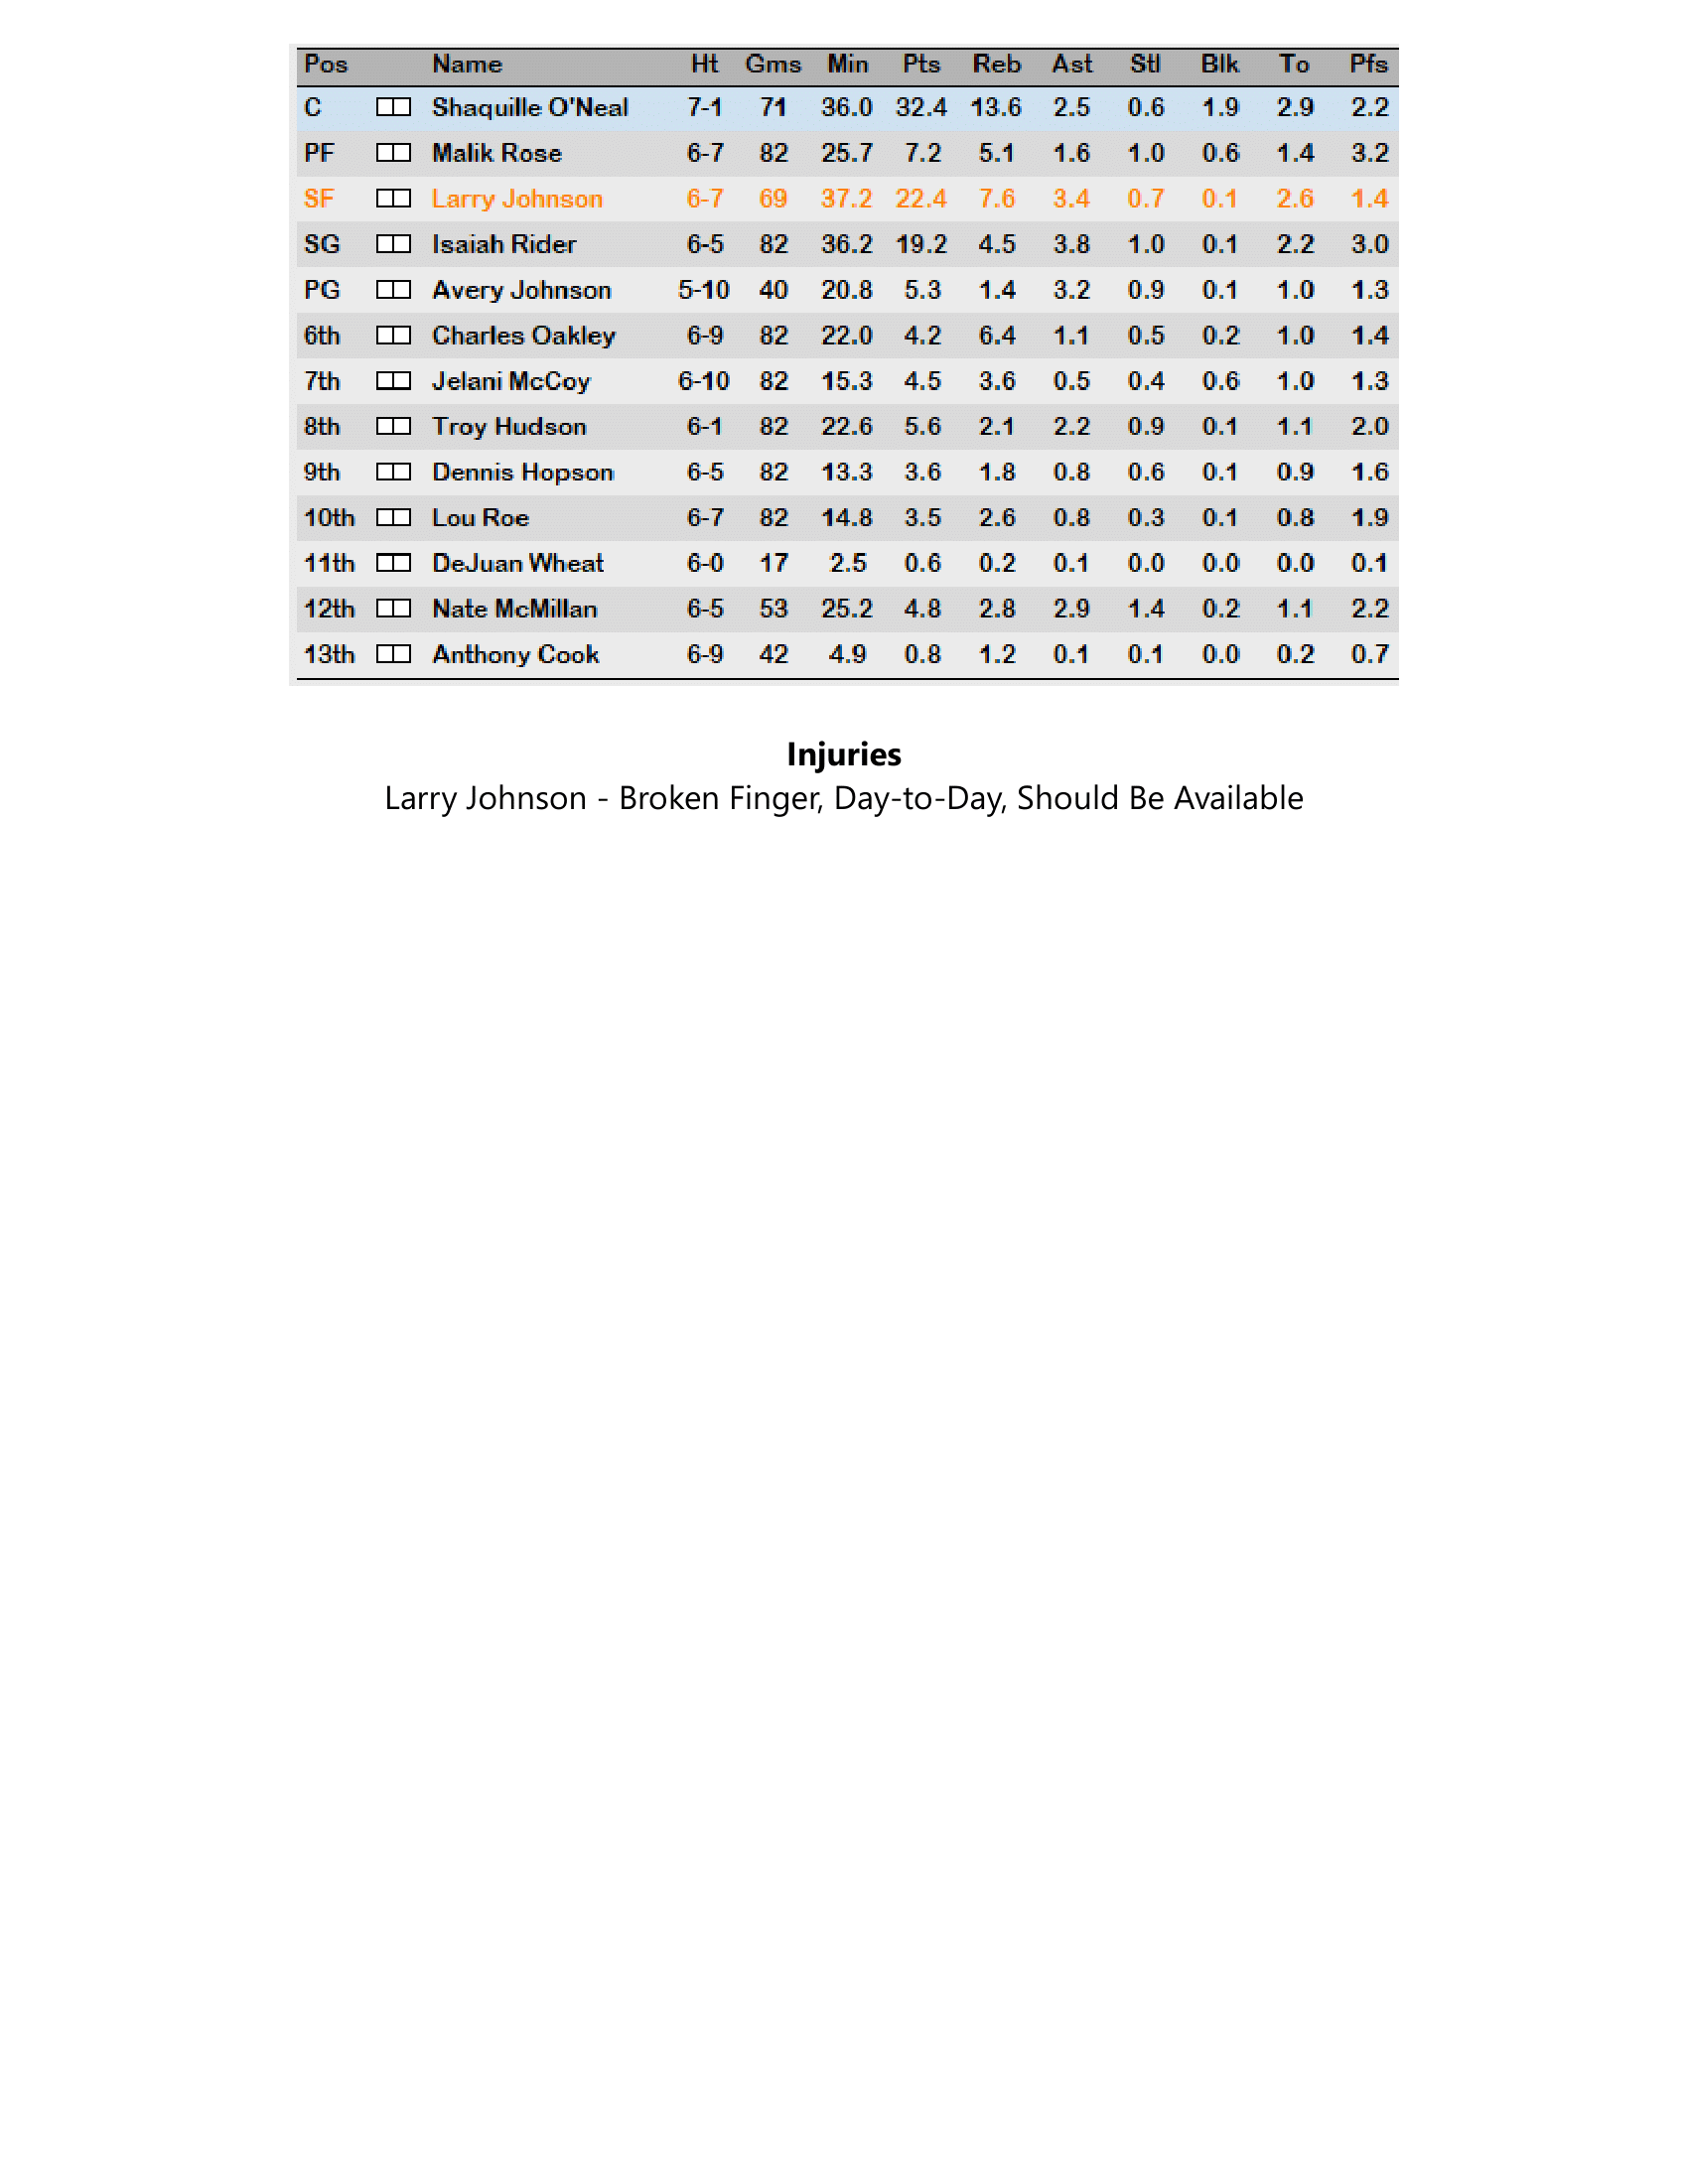 98-99-Part-3-Playoff-Preview-13.png